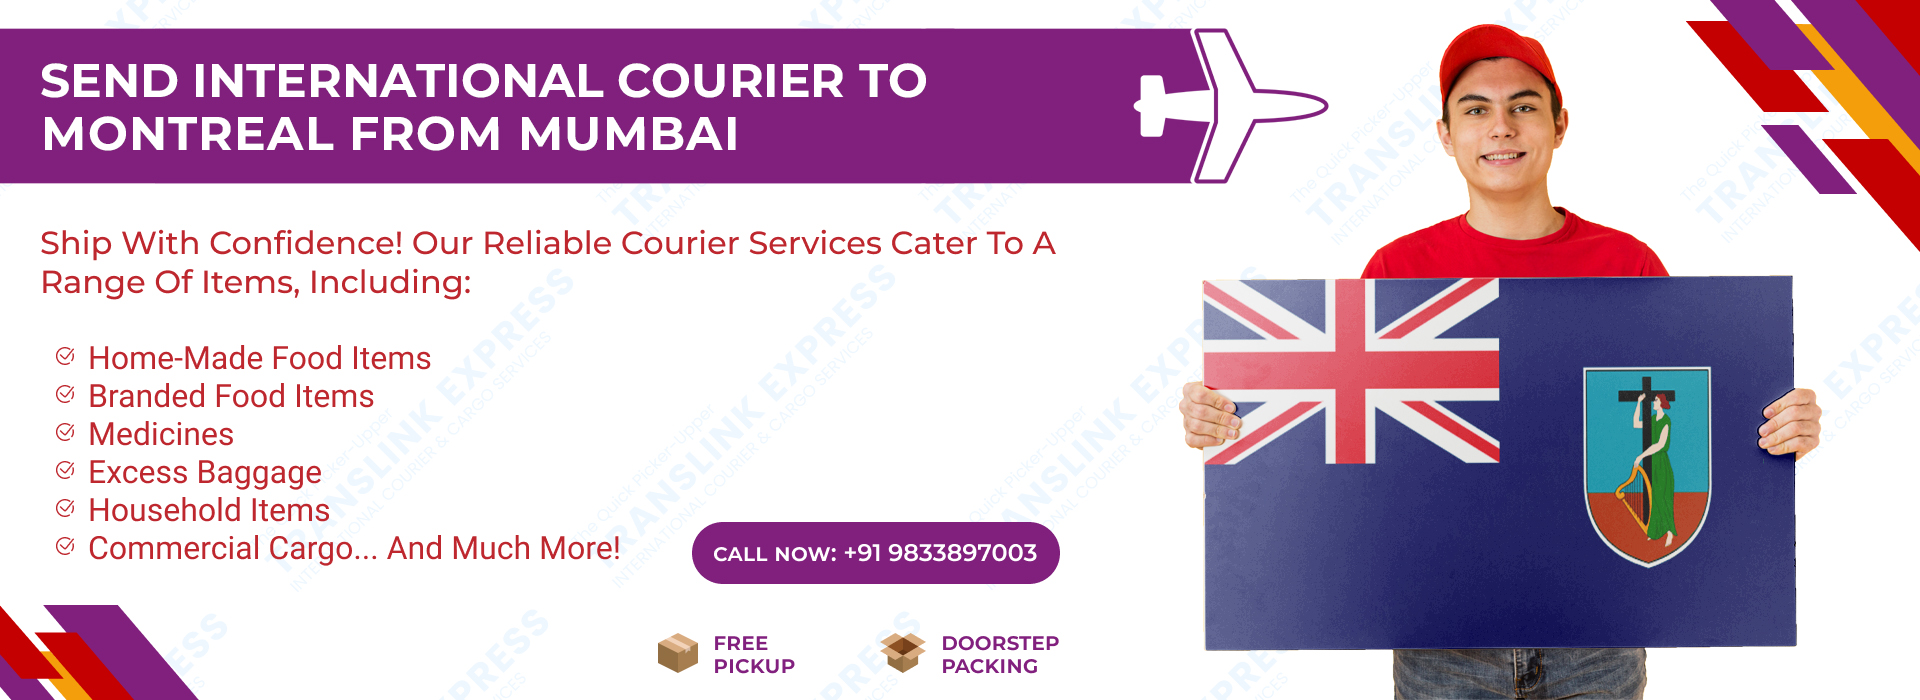 Courier to Montreal From Mumbai